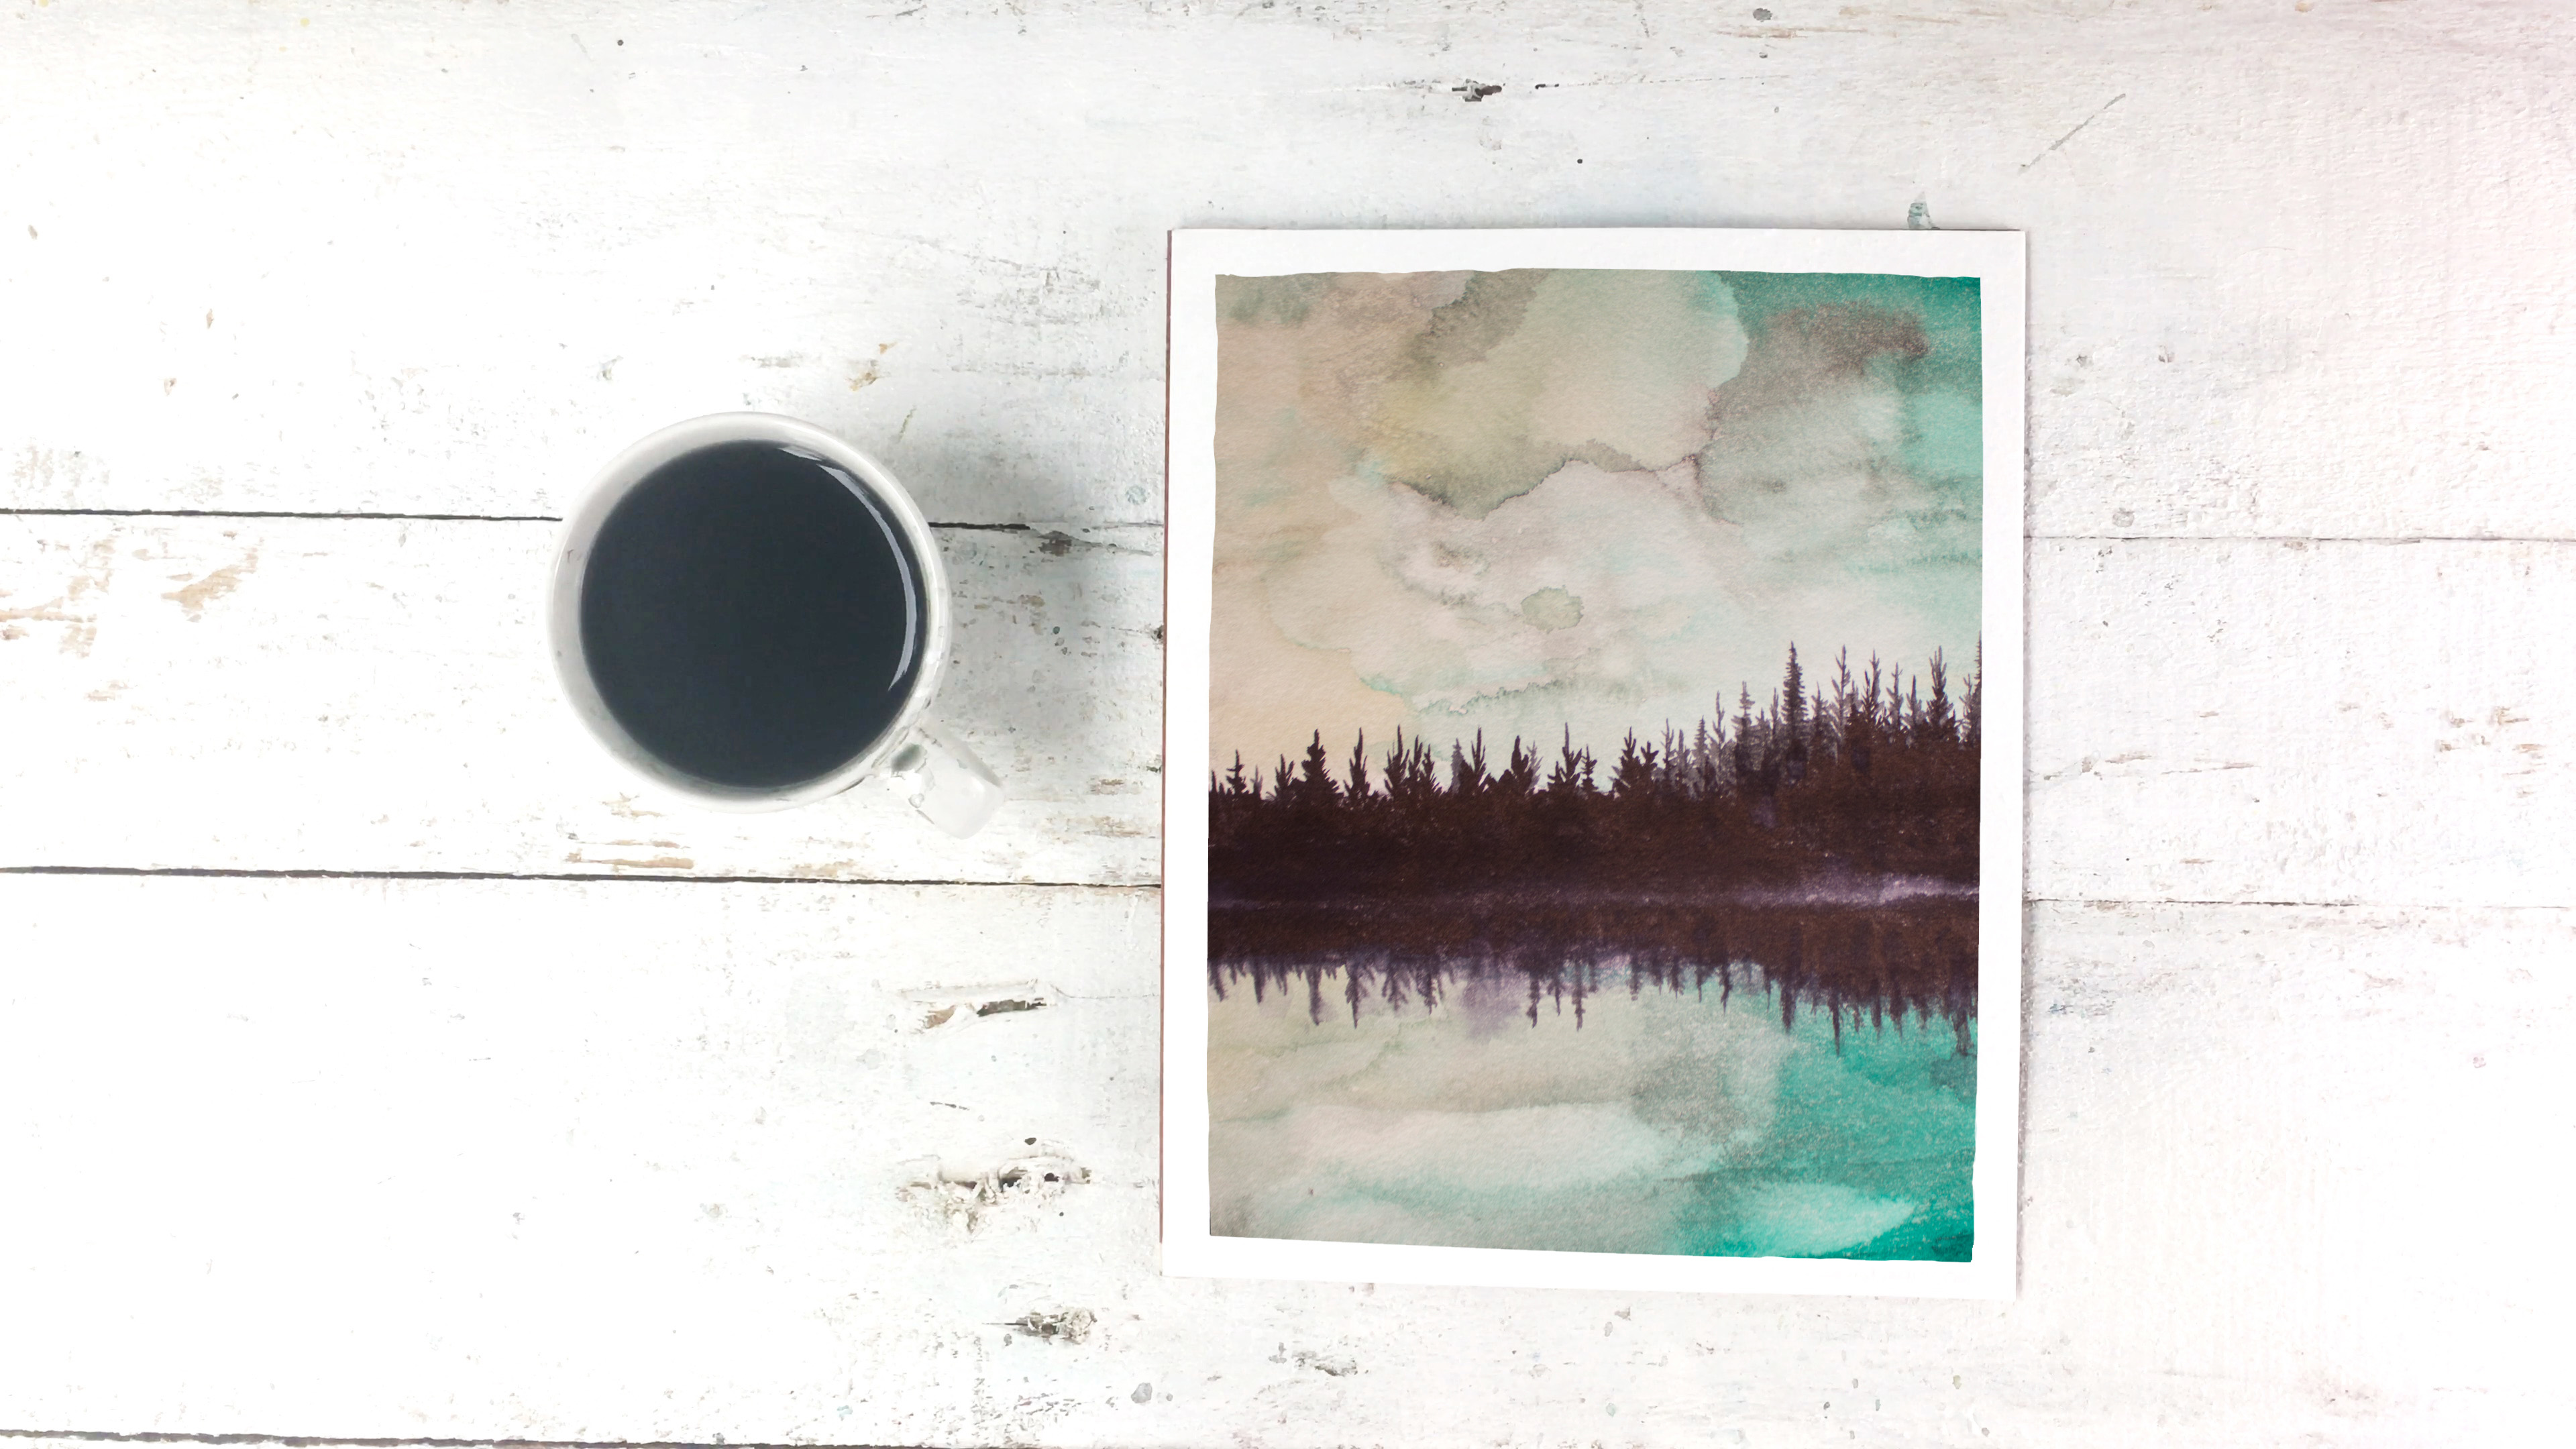 Free Watercolor Winter Pine Forest Reflection On Water Printable